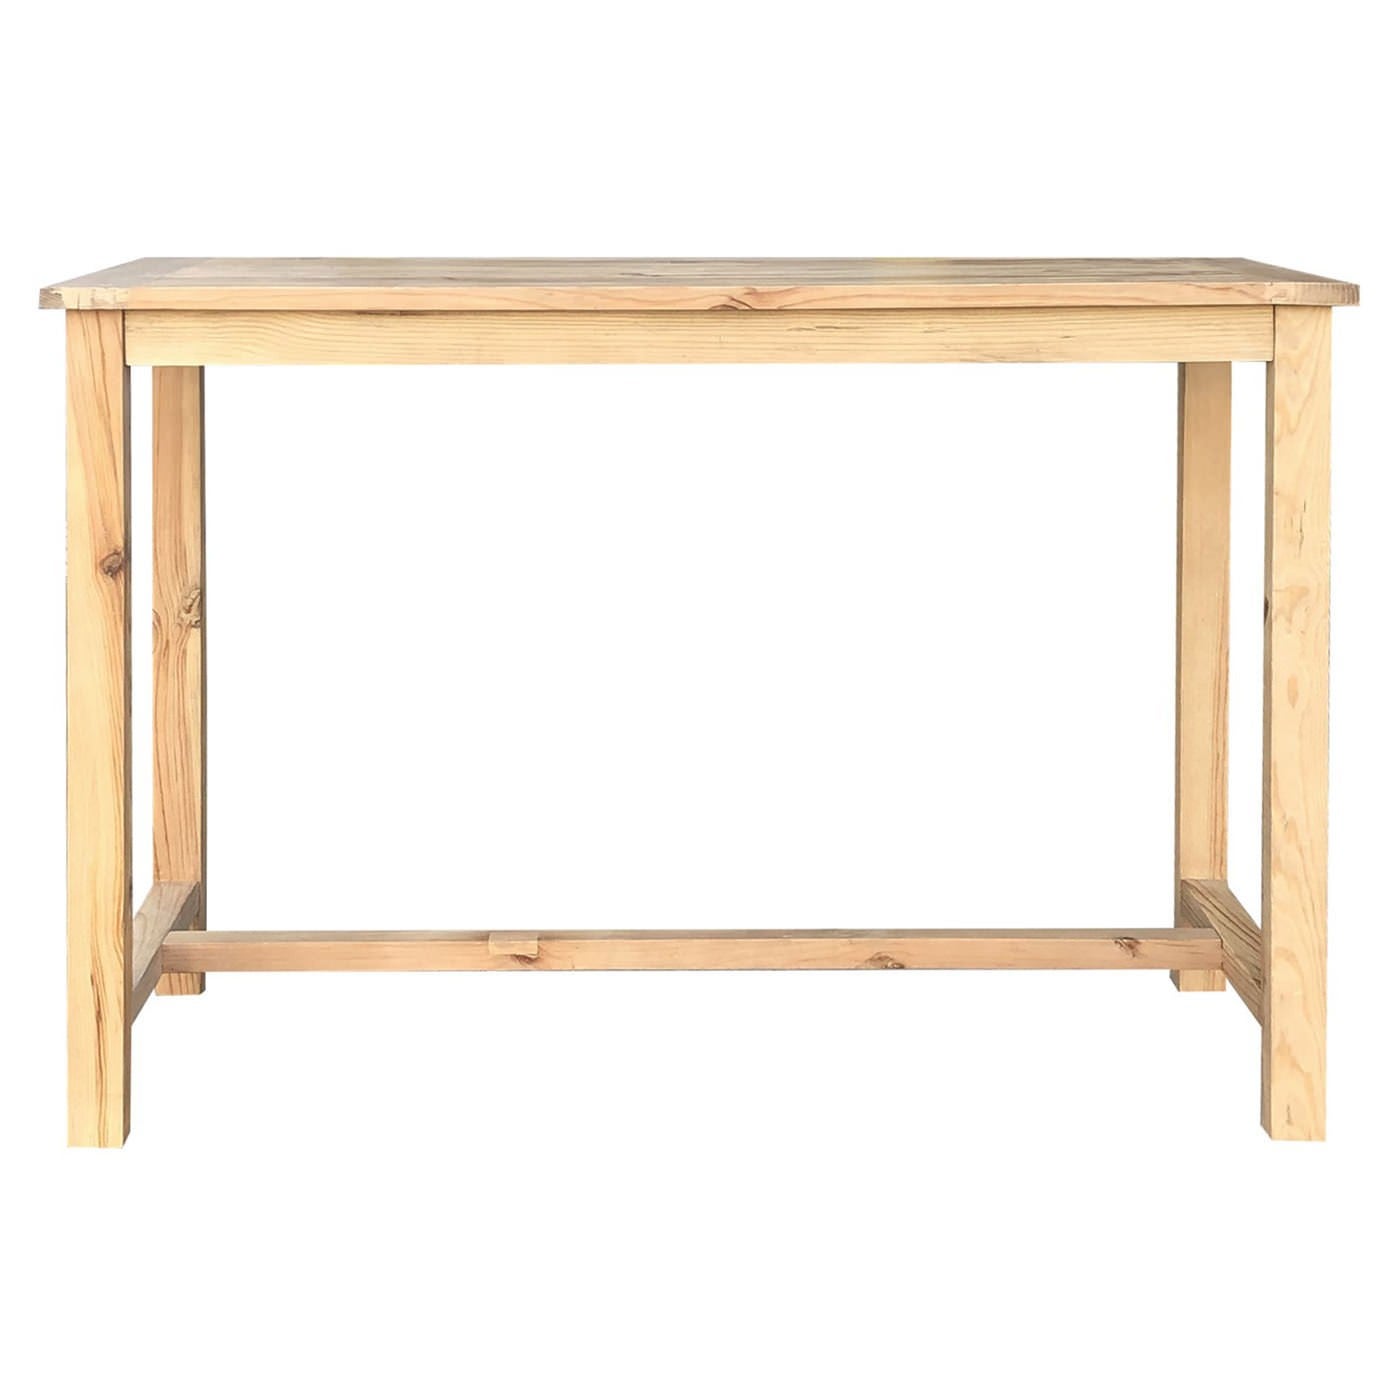 Kalise Recycled Pine Timber Bar Table, 150cm